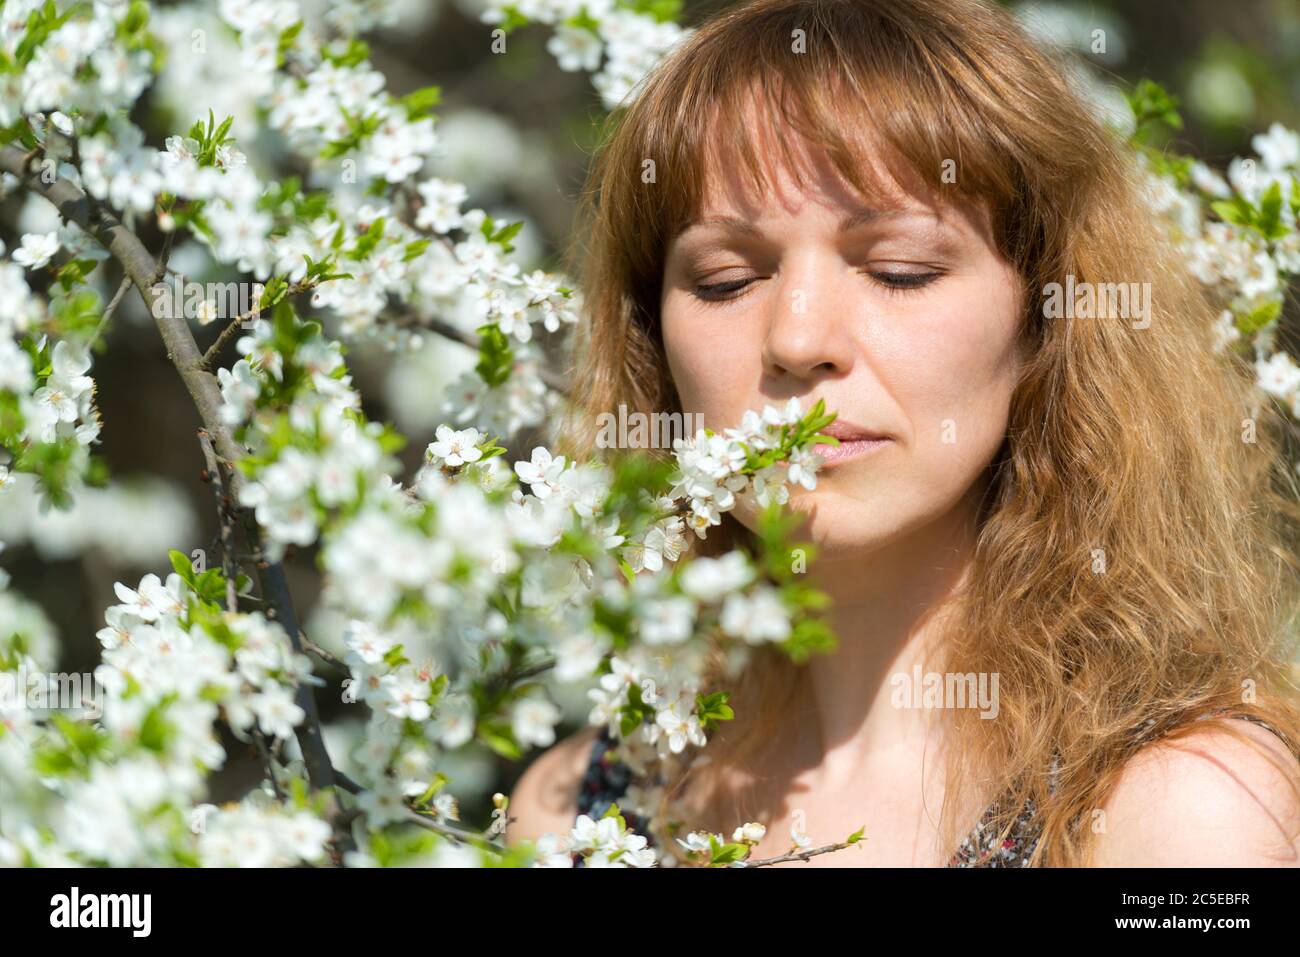 Young blondy woman and cherry blossom Stock Photo